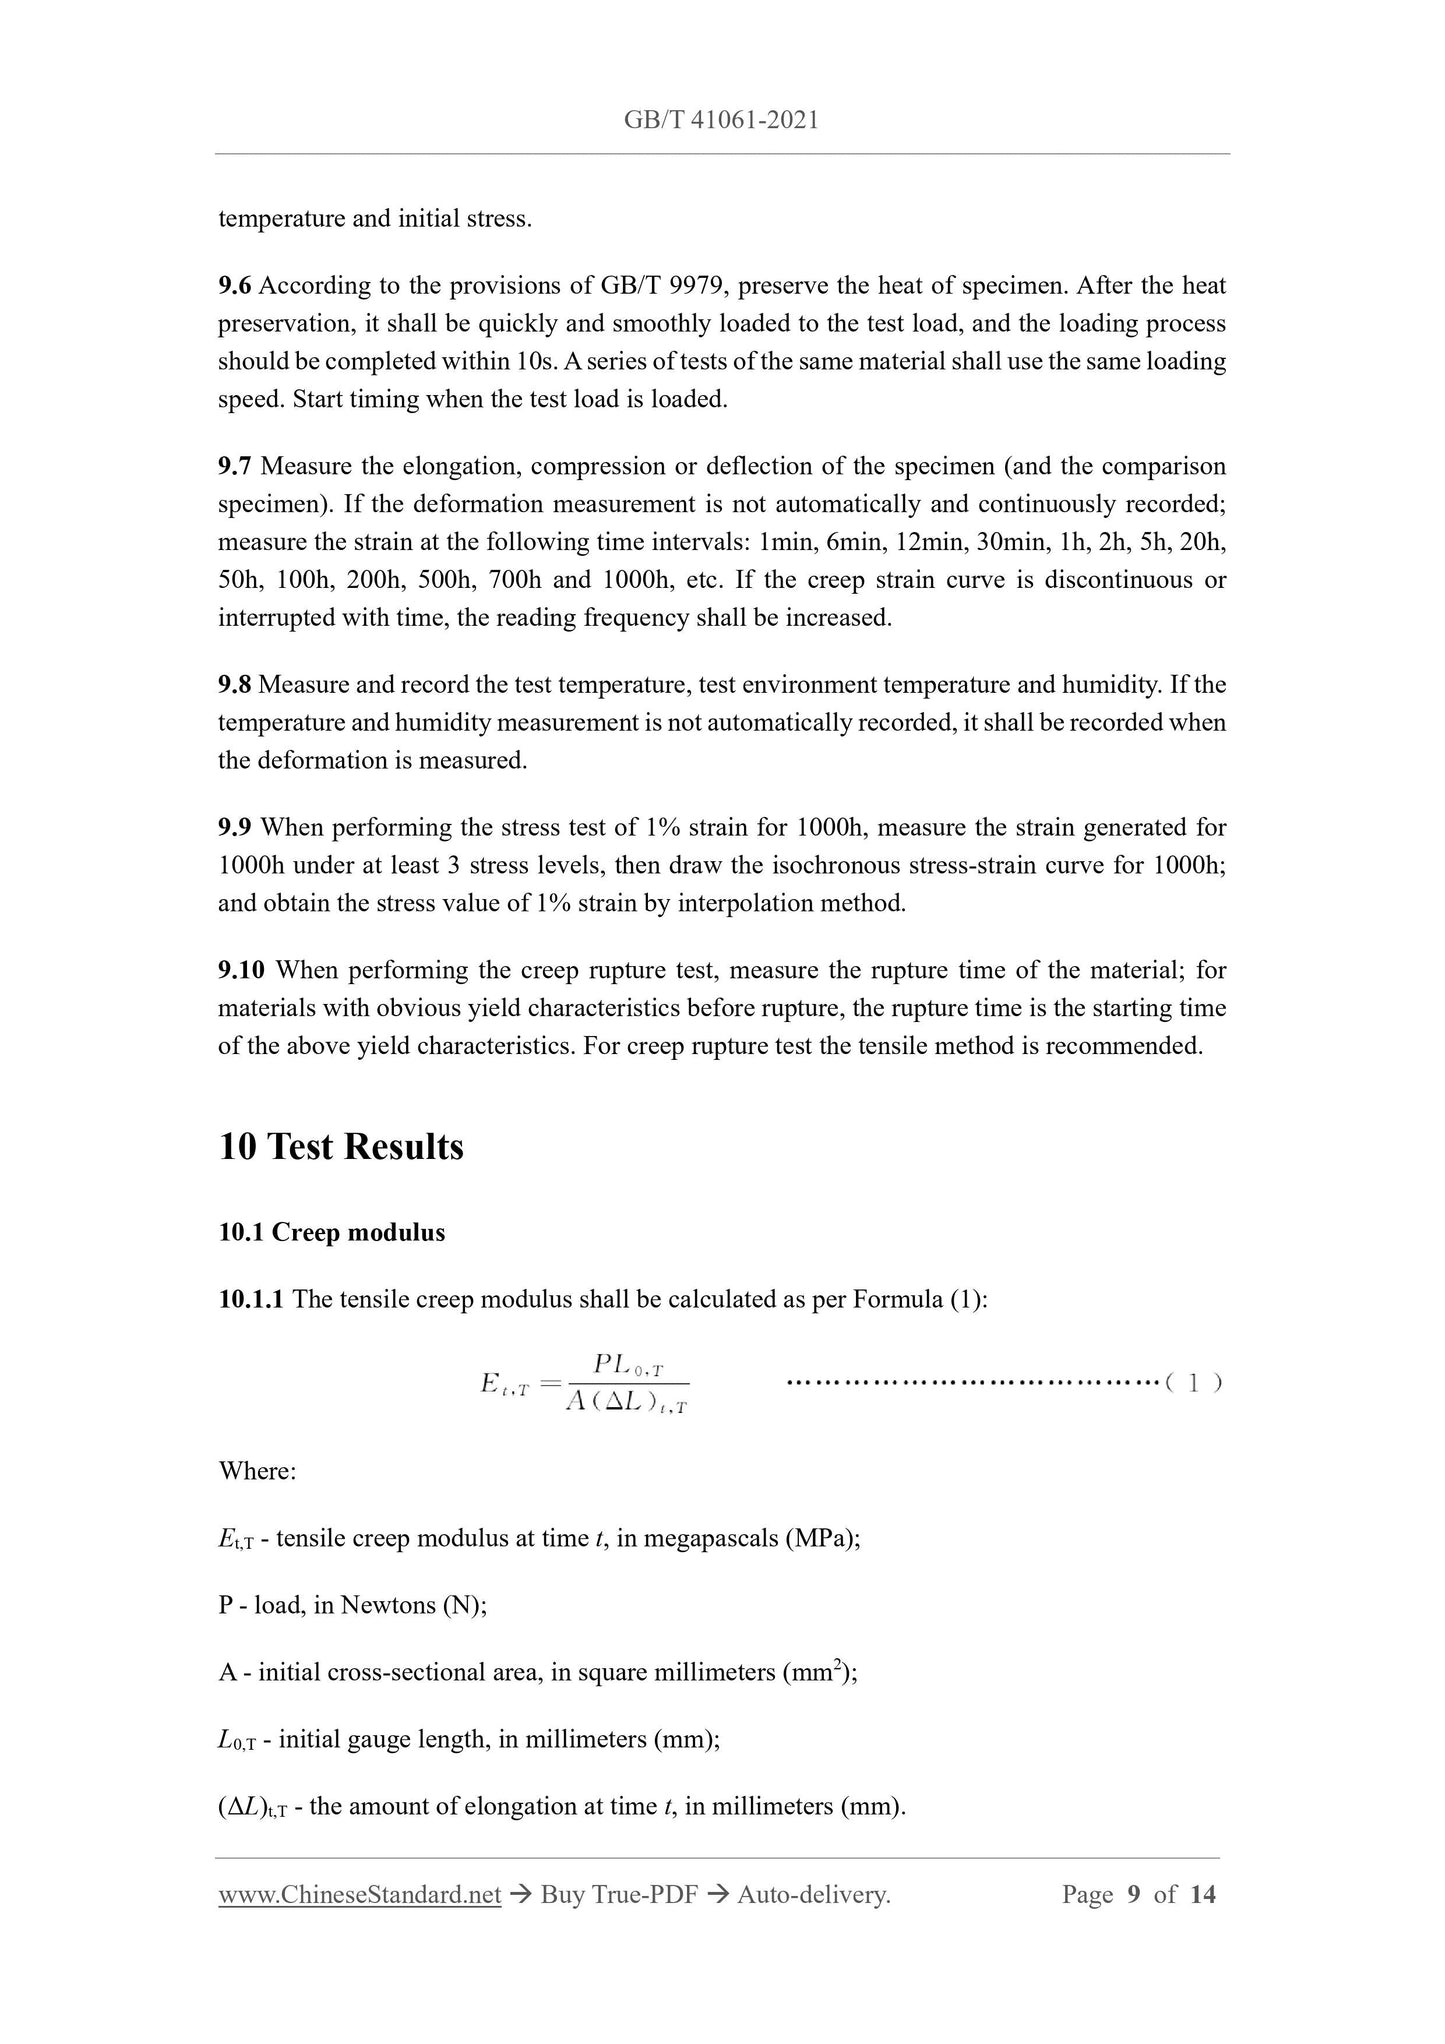 GB/T 41061-2021 Page 6